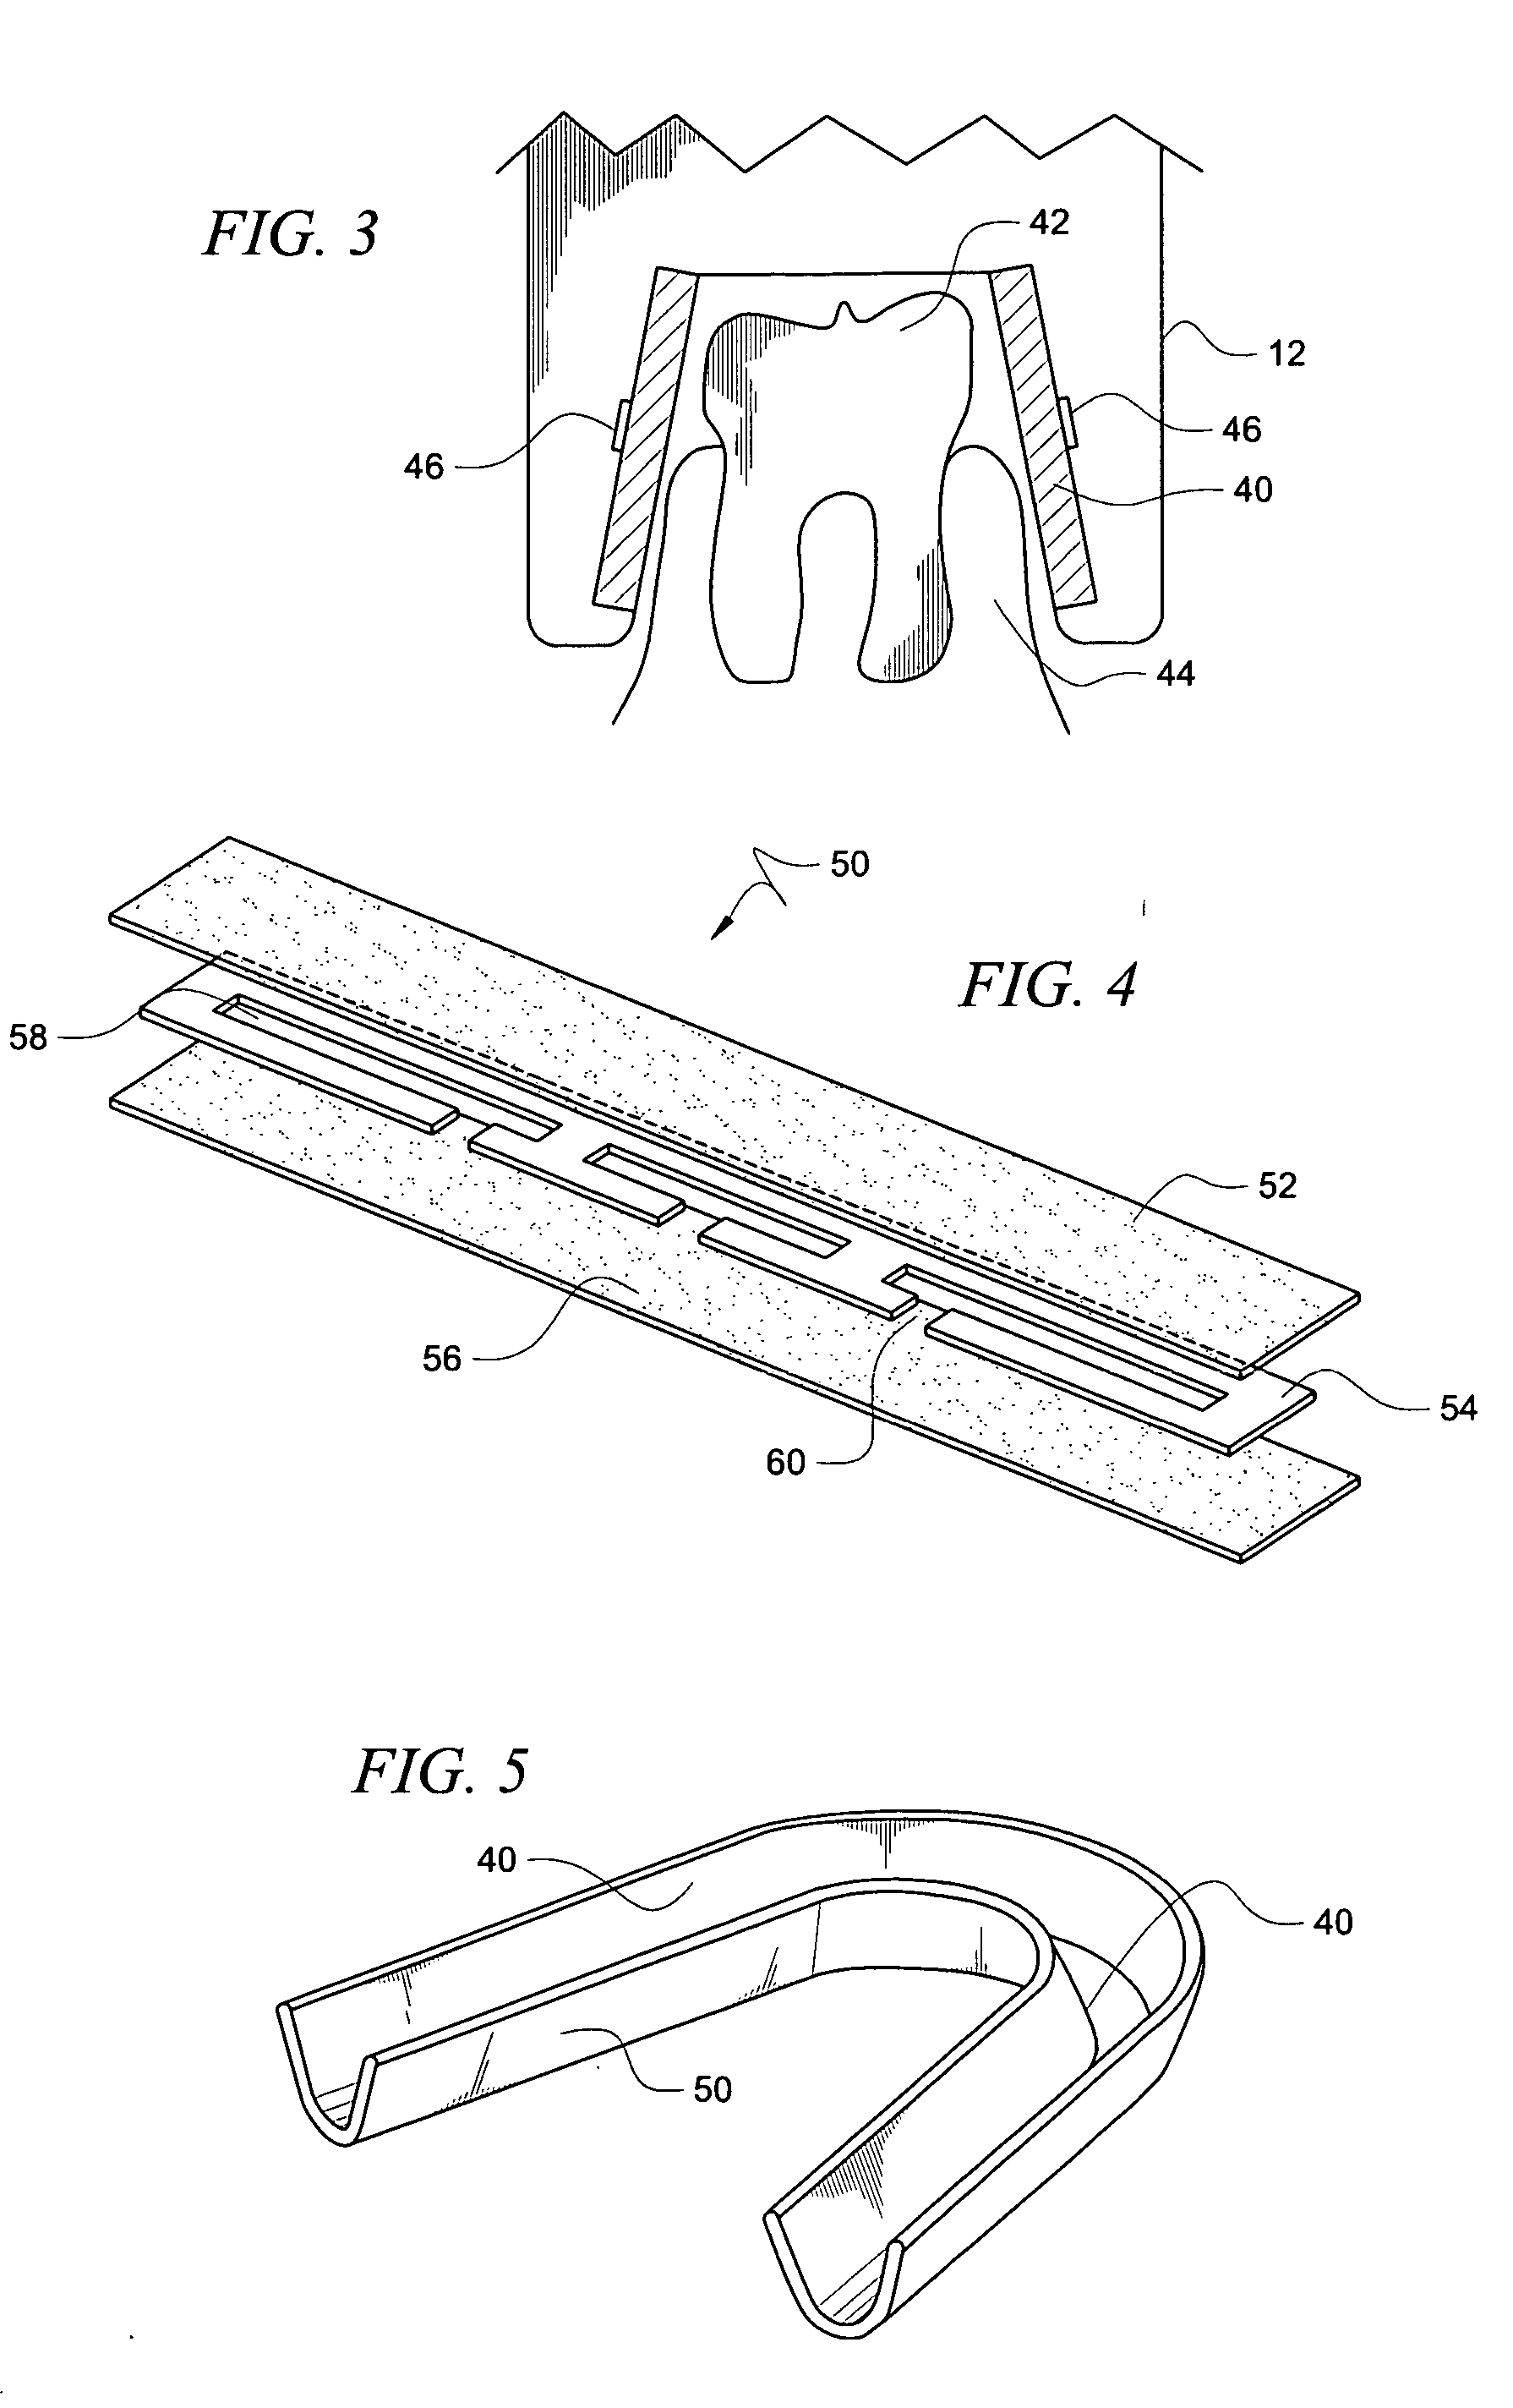 Treatment device and method for treating or preventing periodontal disease through application of heat